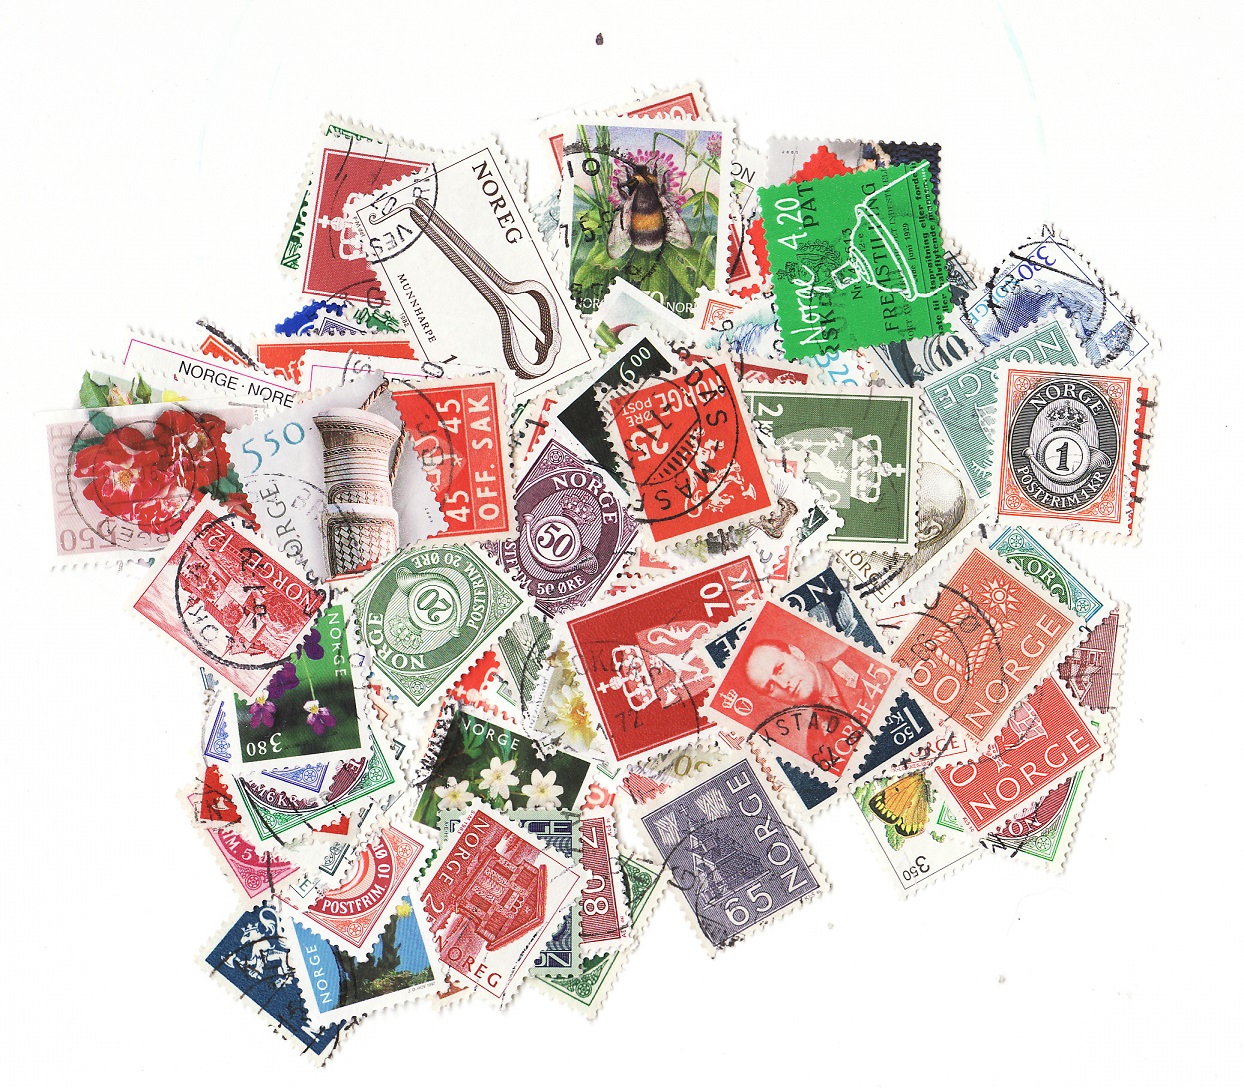 Norway Stamp Packet, 300 different stamps from Norway